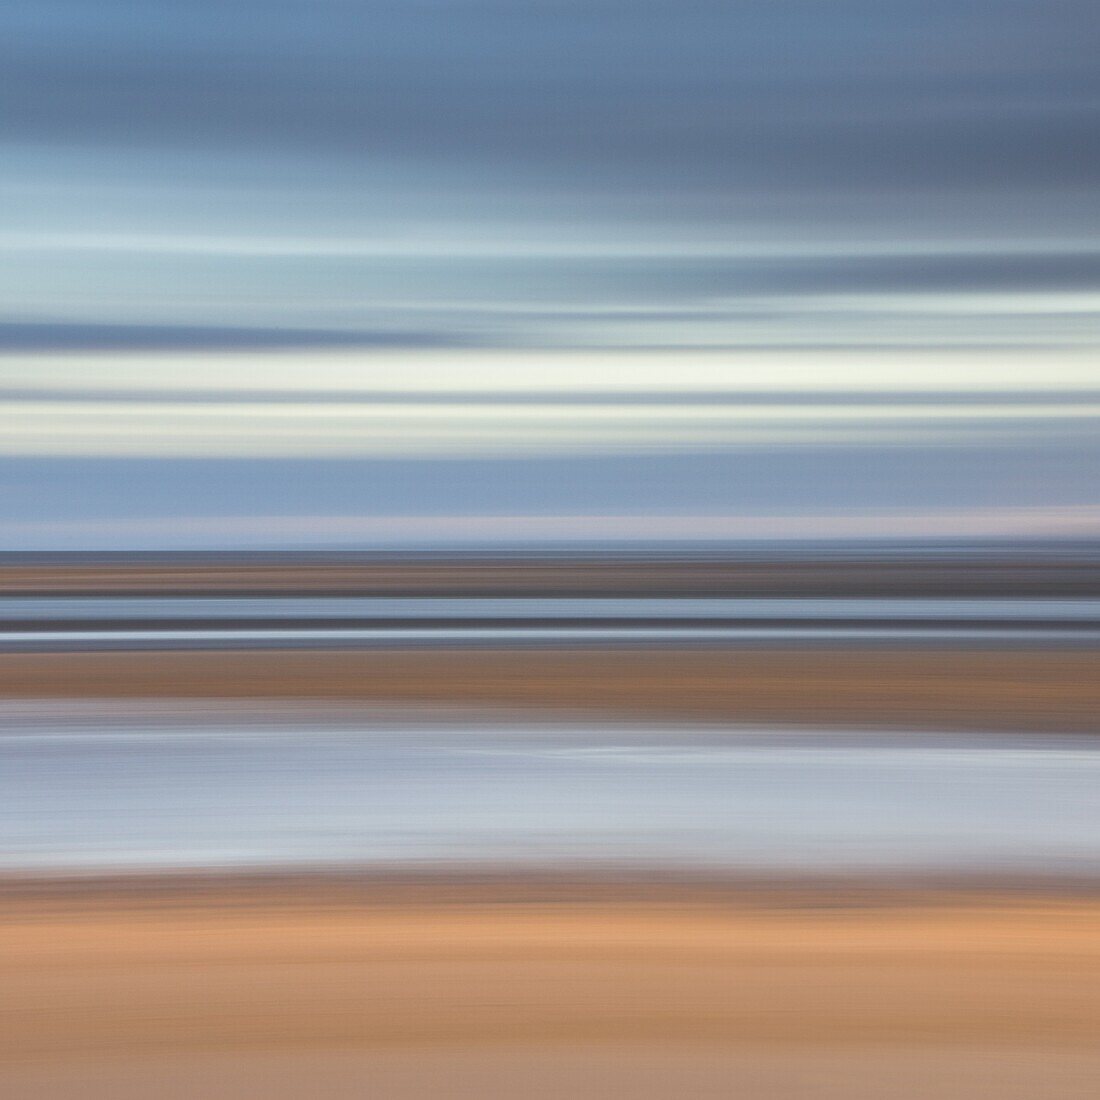 Abstract image of the view from Alnmouth Beach to the North Sea, Alnmouth, Northumberland, England, United Kingdom, Europe